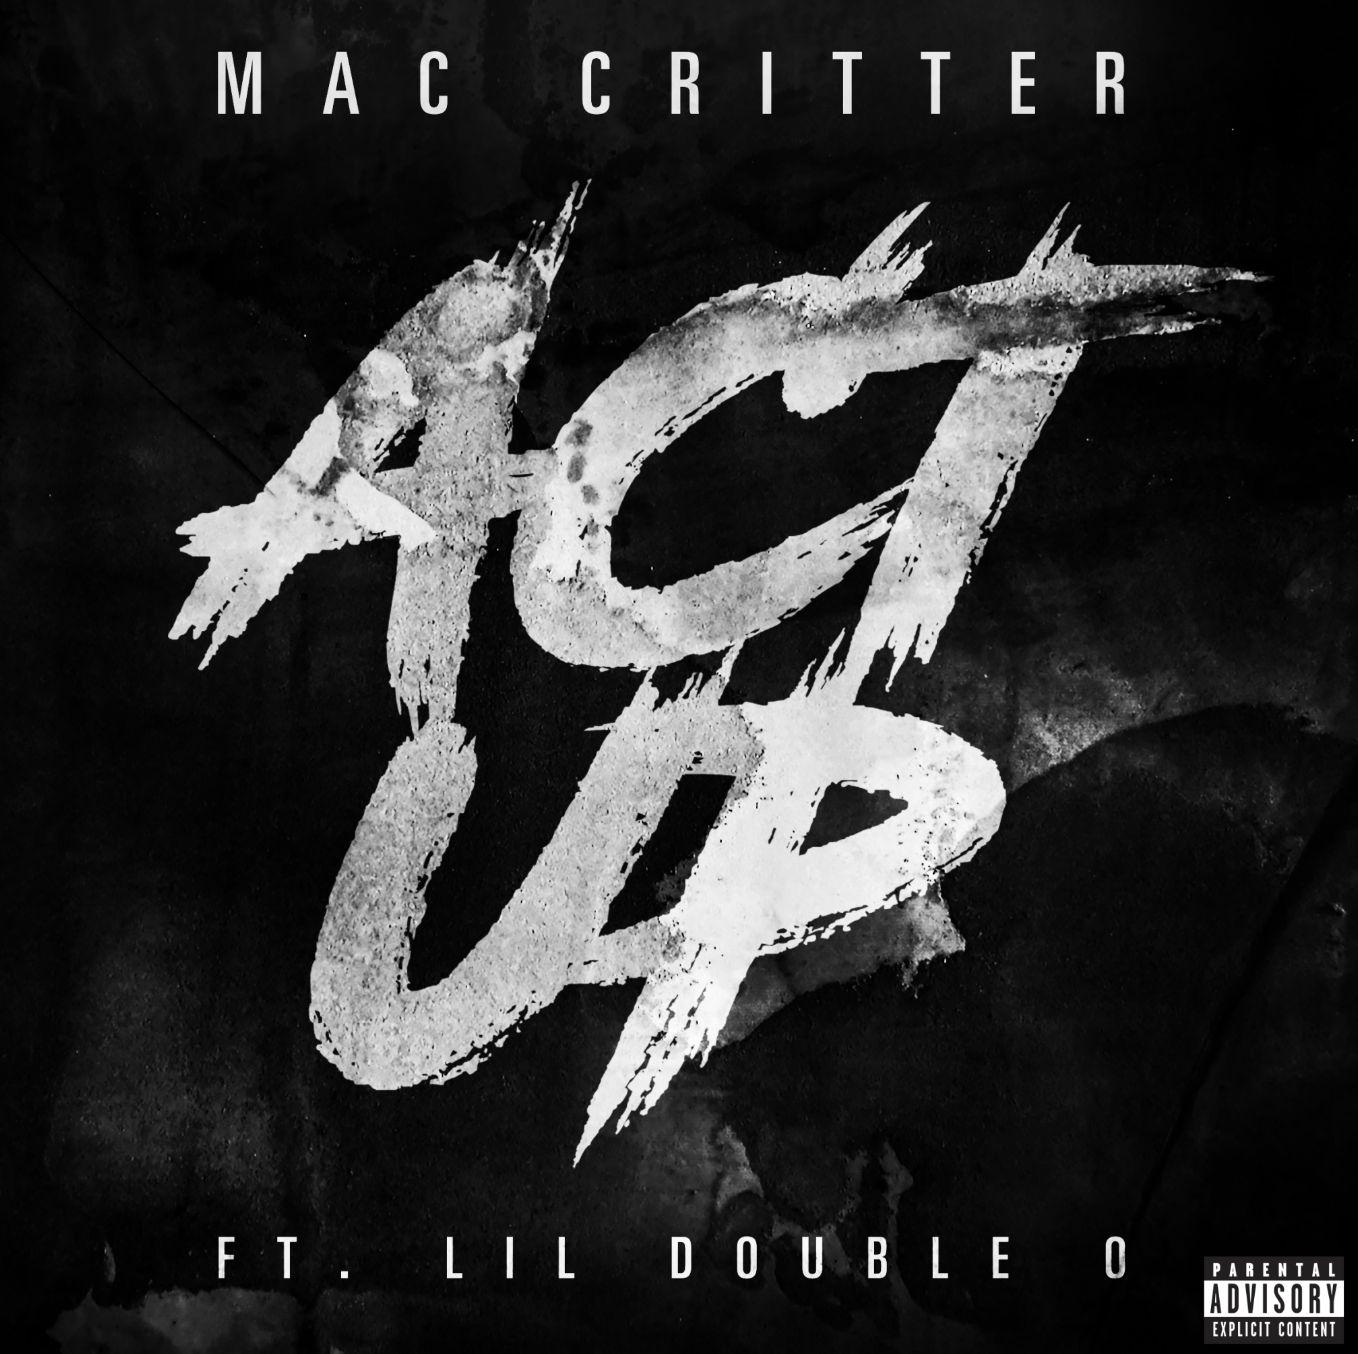 Mac Critter – Act Up (feat. Lil Double 0) 